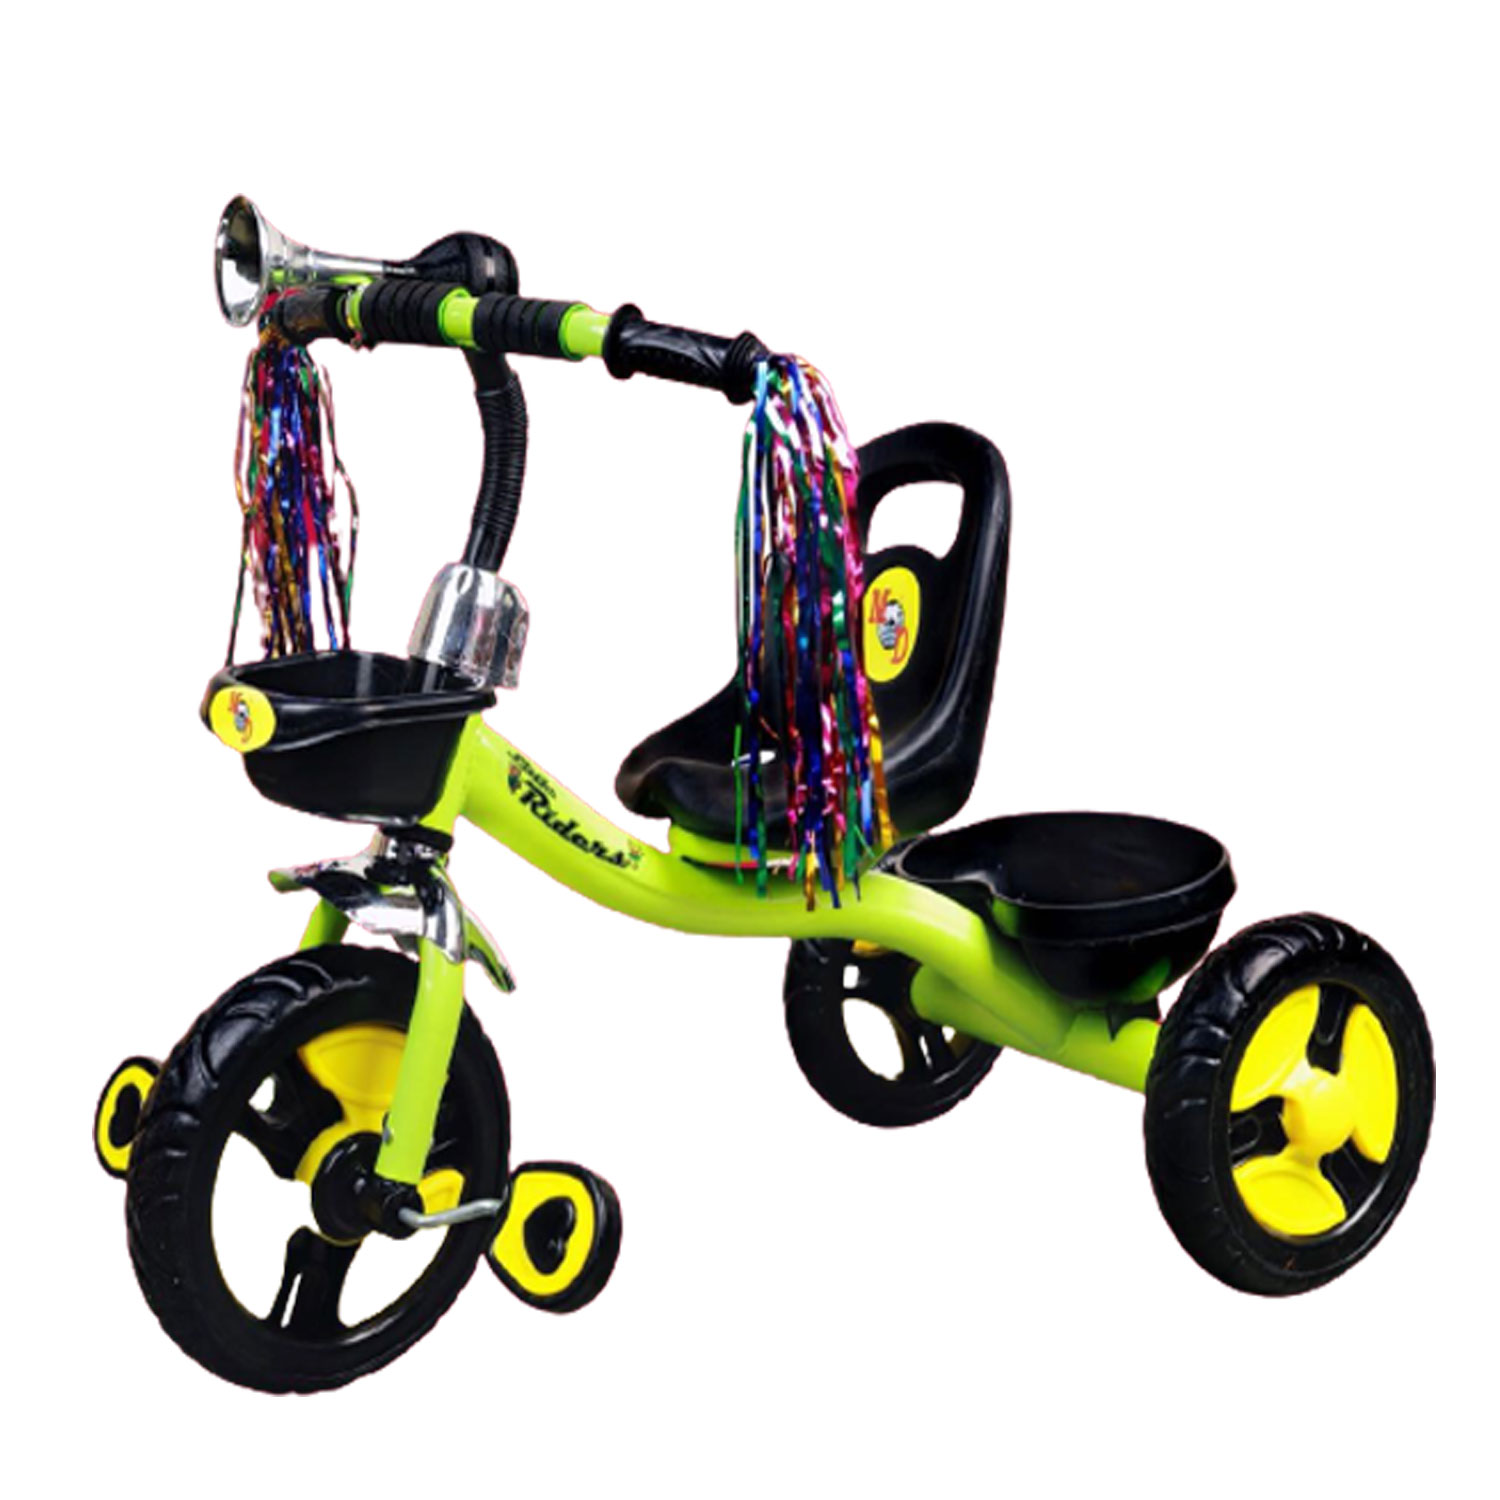 NAVRANGI BABY TRICYCLE FOR KIDS WITH FRONT OR BACK BASKET. TRICYCLE FOR KIDS  MD-106 